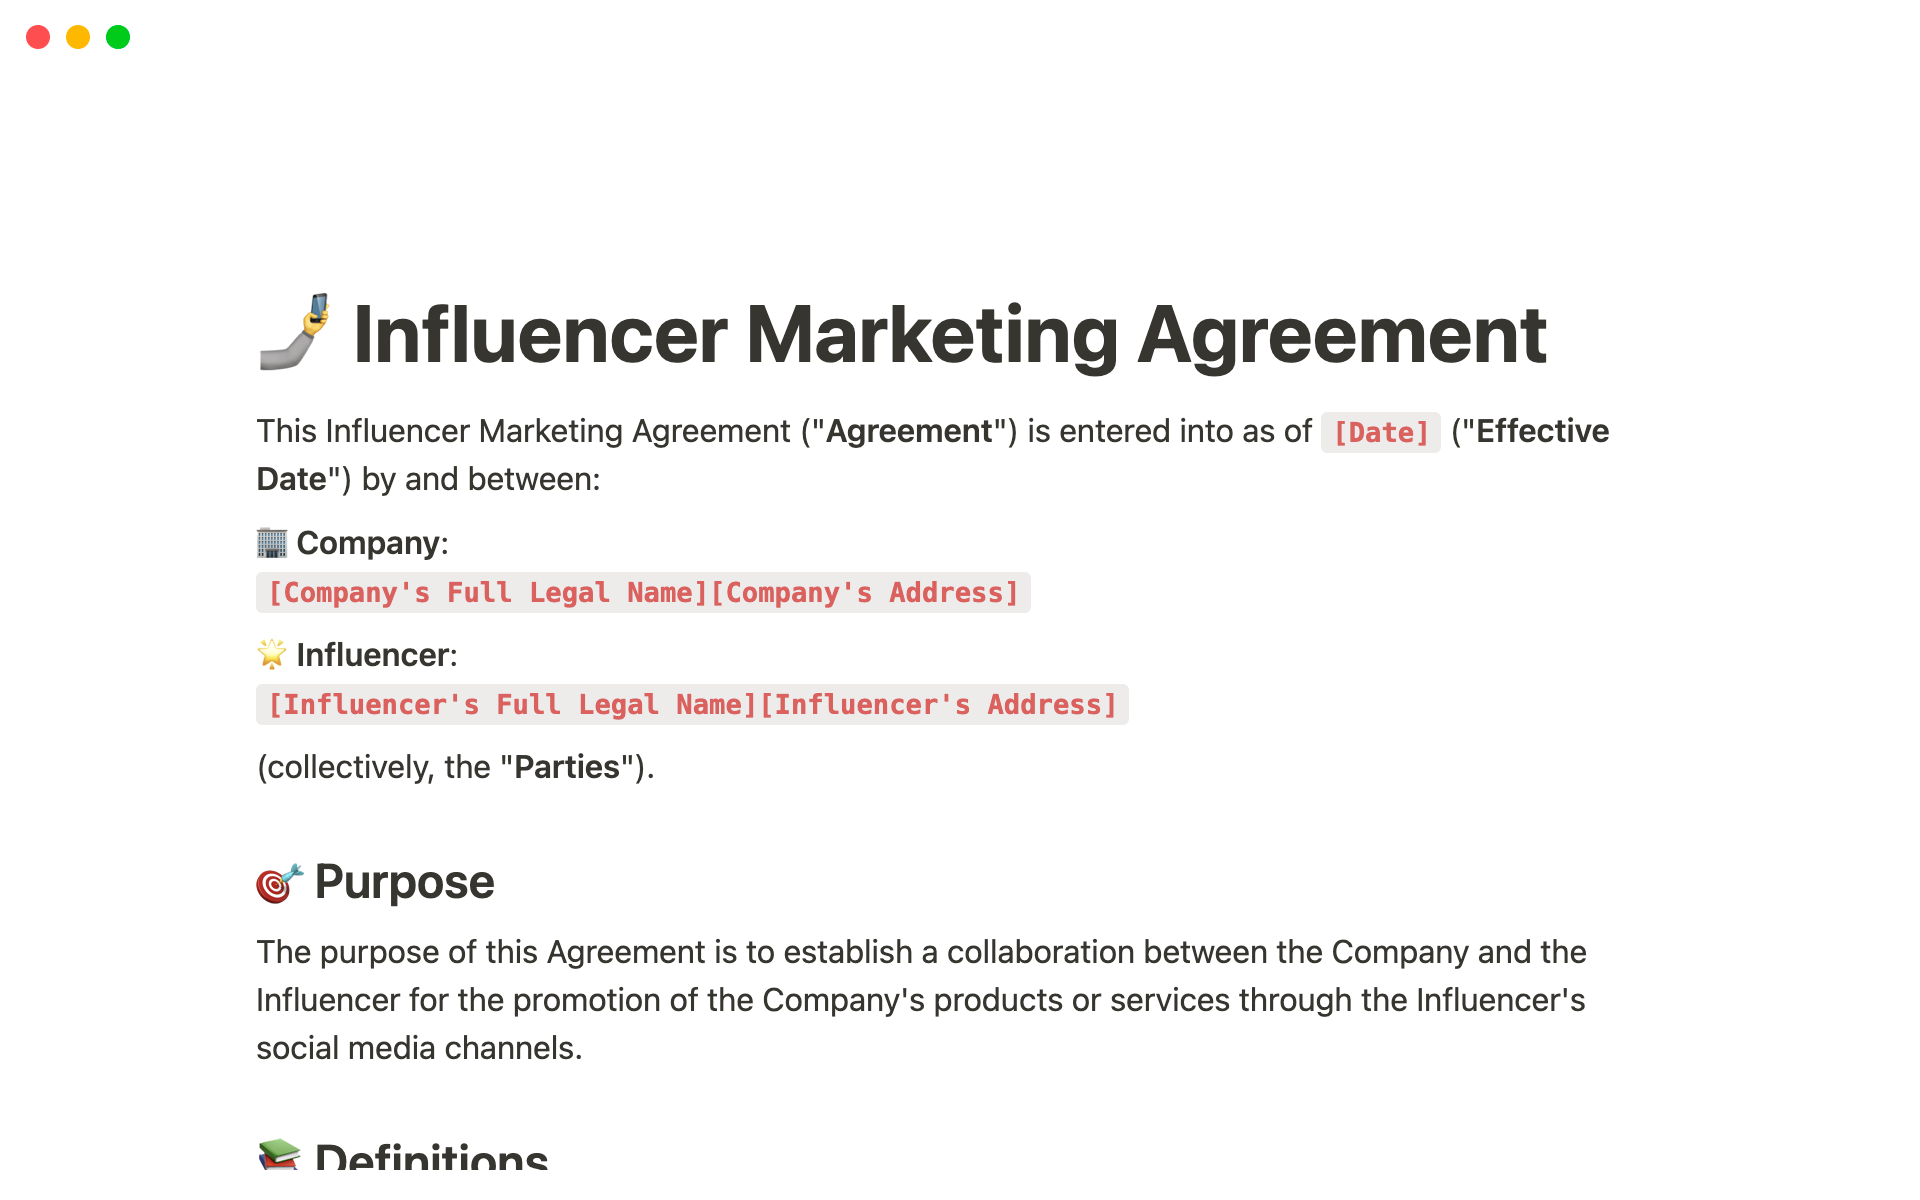 A contract template for collaborations between brands and influencers, covering deliverables, compensation, intellectual property rights, and confidentiality.